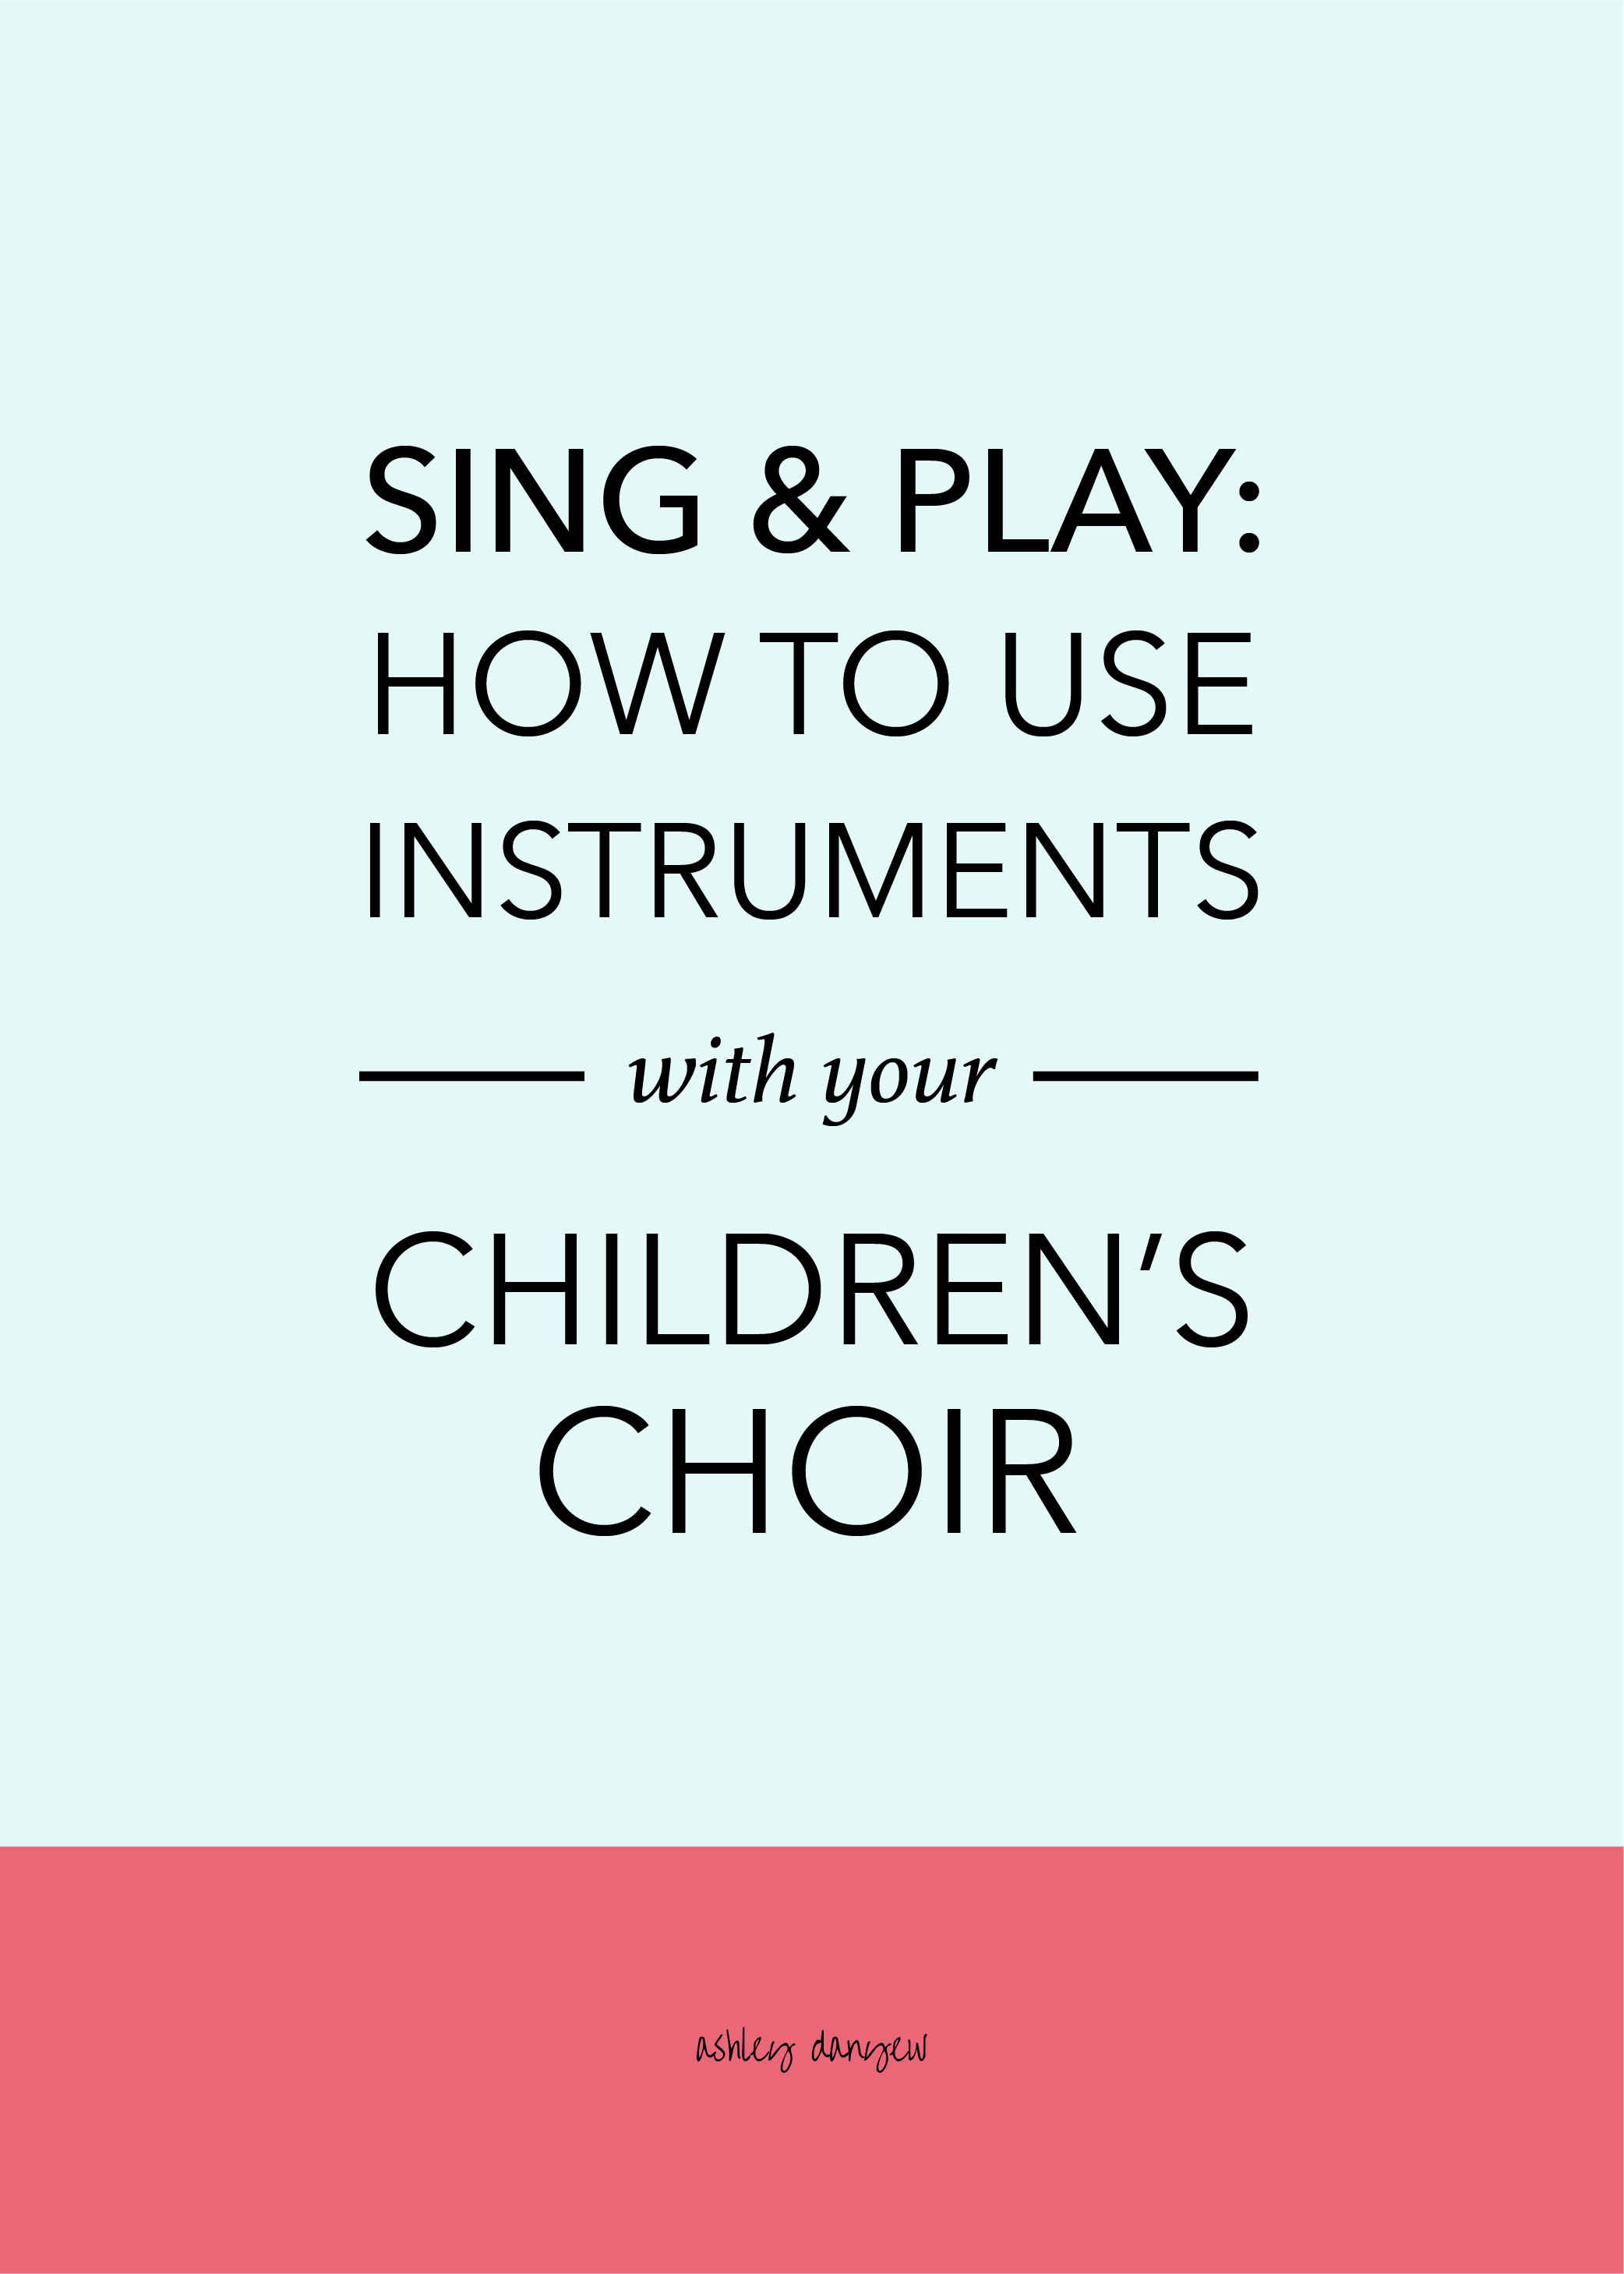 Copy of Sing & Play: How to Use Instruments with Your Children's Choir